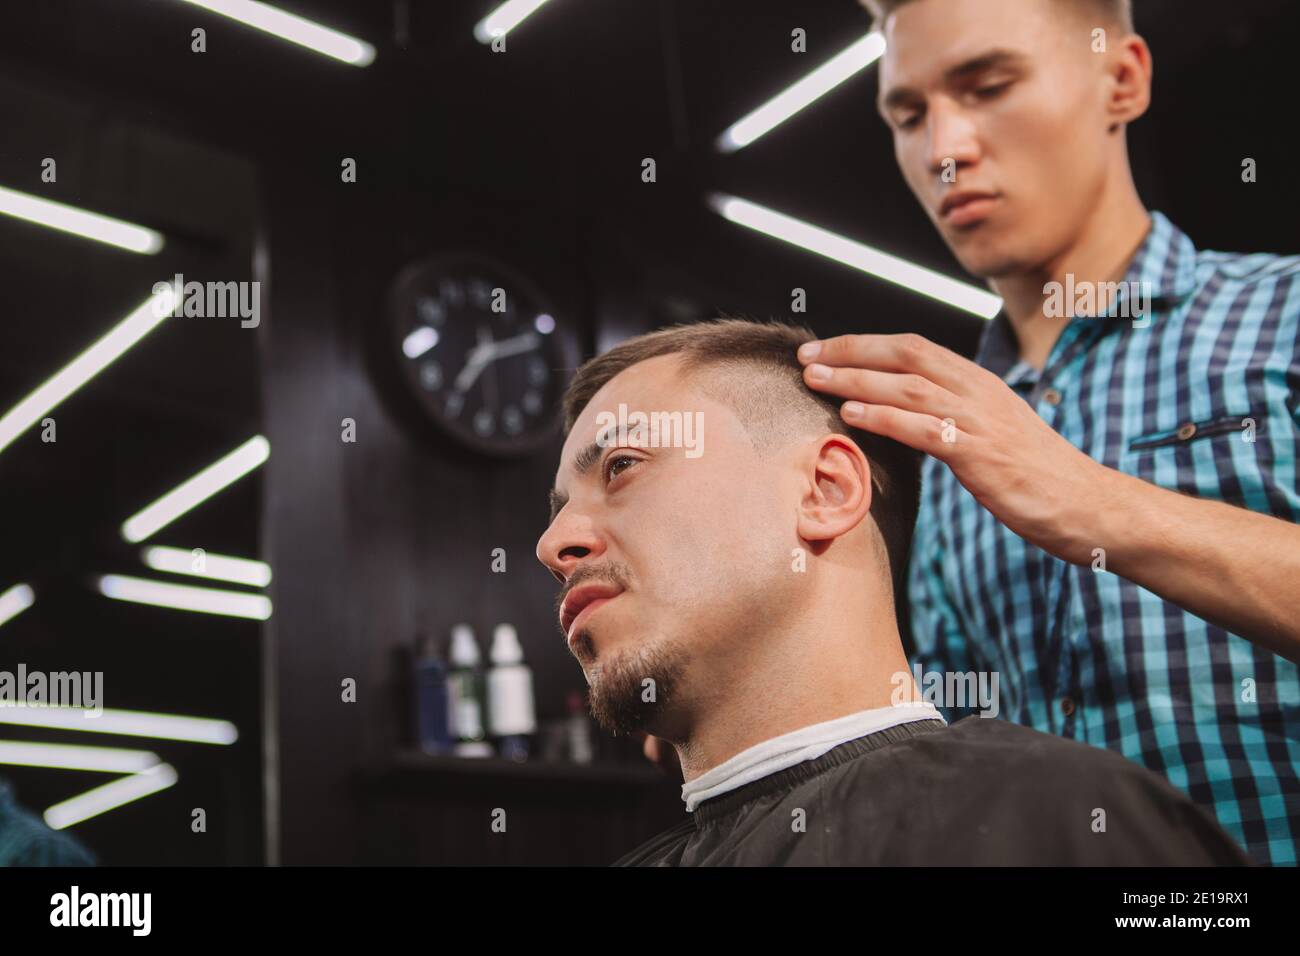 Cropped close up of a mature man getting a new hairstyle at the barbershop, copy space. Young barber styling hair of a male client. Professionalism, h Stock Photo